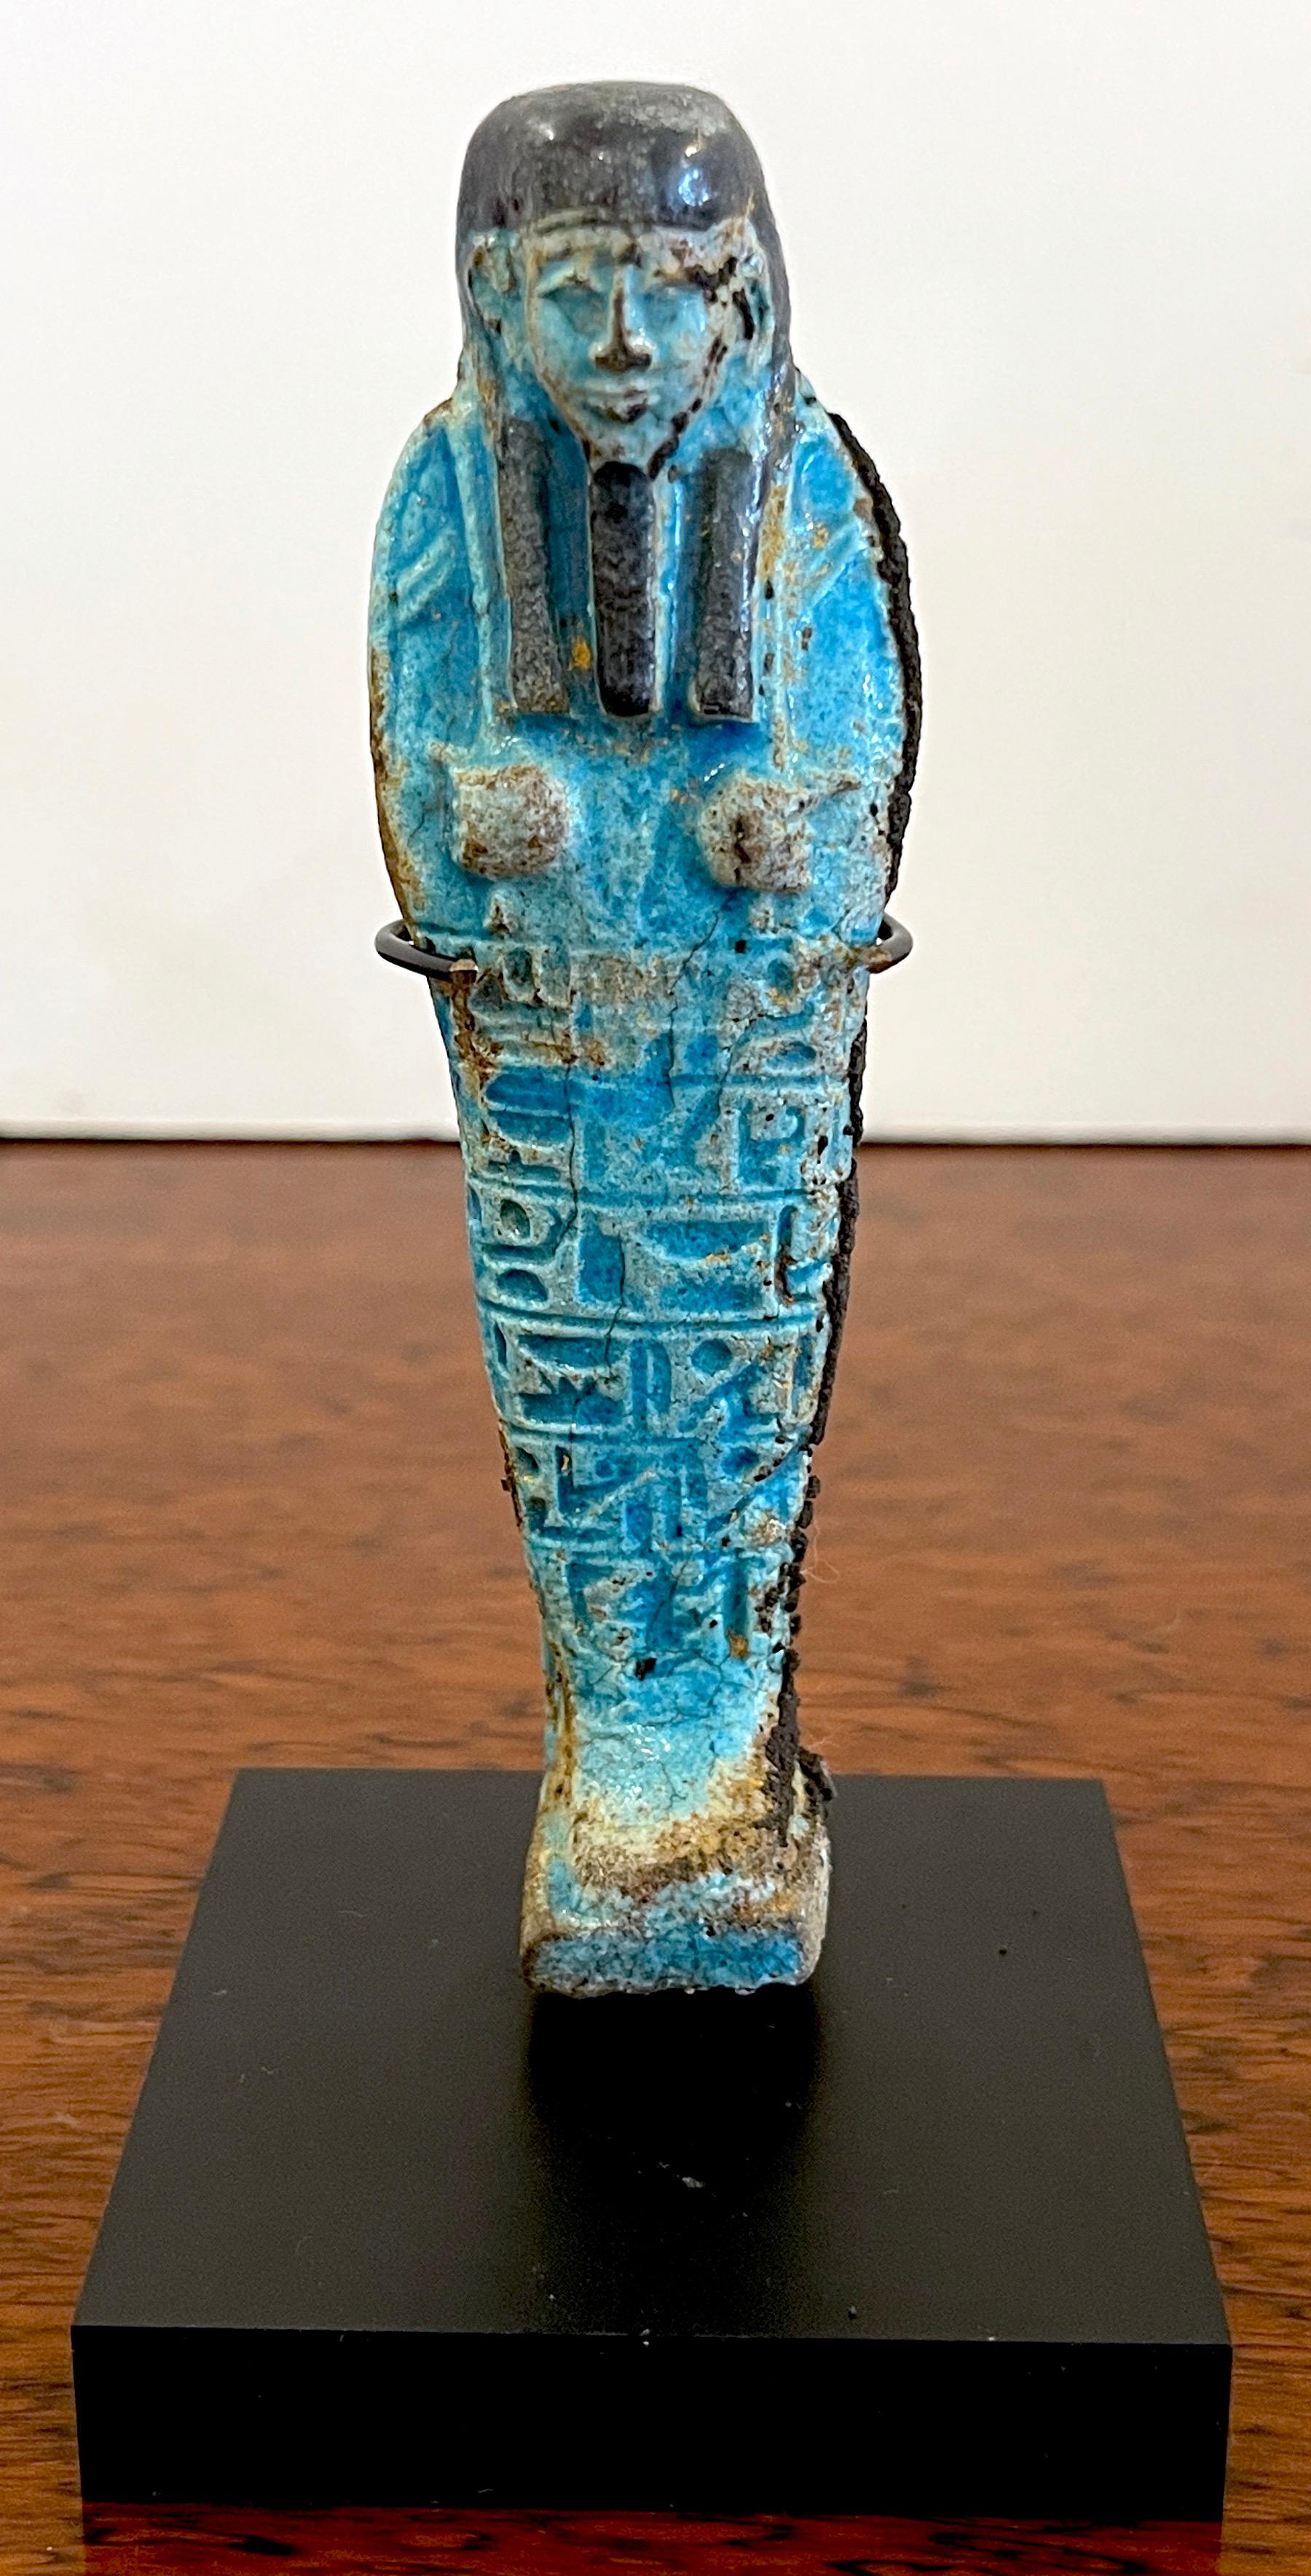 Egyptian Turquoise Faience Shabti, Museum Mounted 
Egypt, 300-600 BC

Dating back to 300-600 BC, this exceptional Egyptian turquoise faience shabti is a finely executed and exquisite representation of a funerary figure. Museum mounted for display